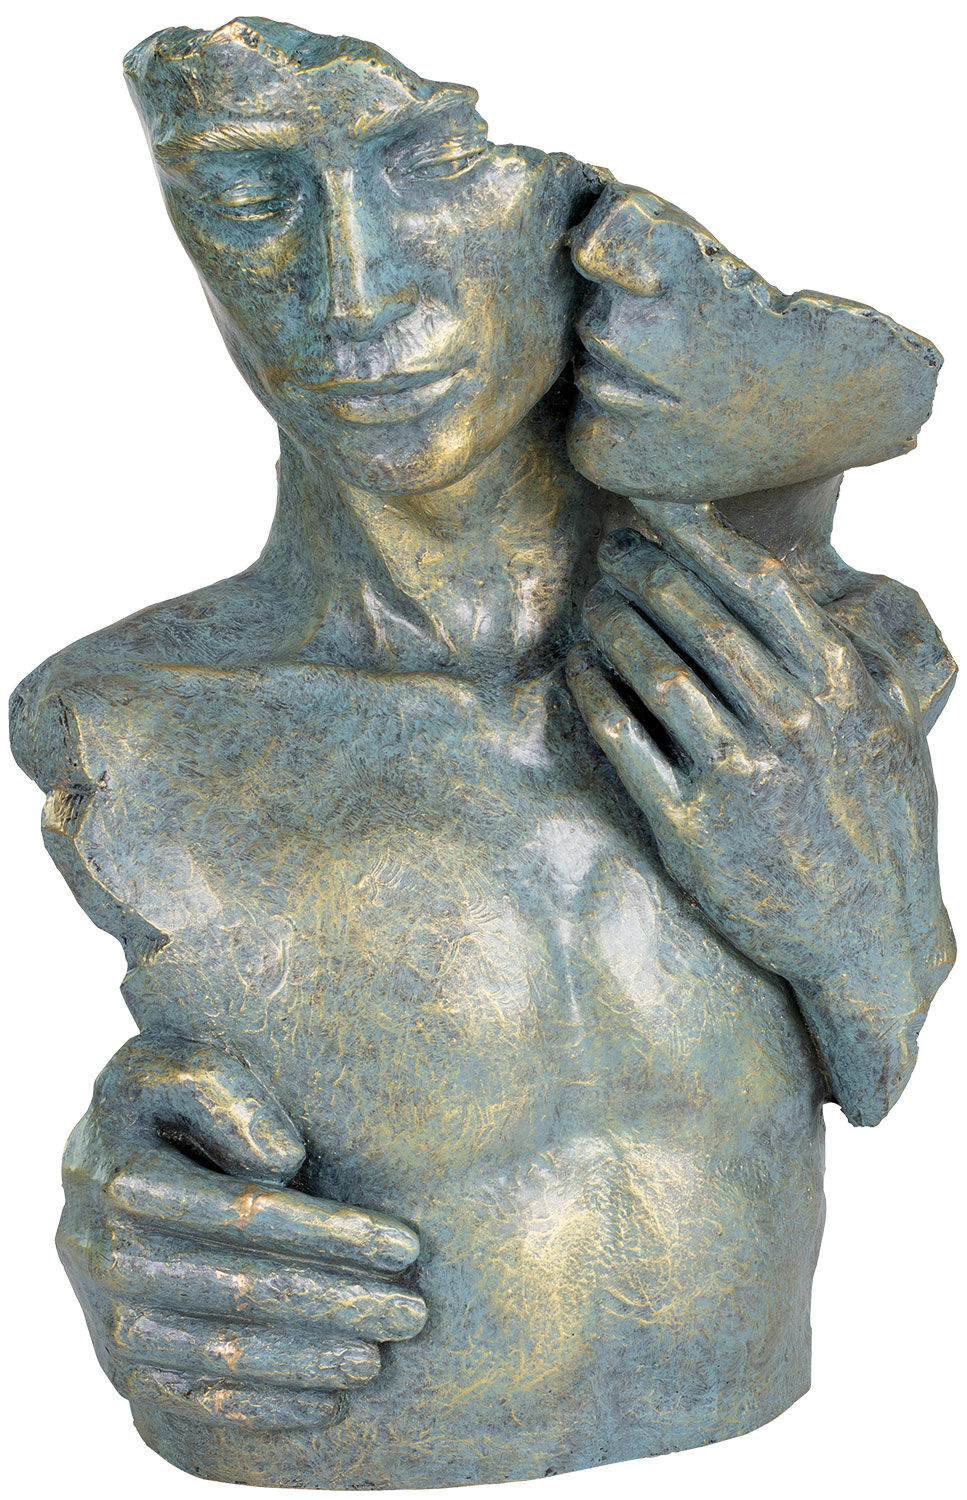 Sculpture "In Love", artificial stone by Angeles Anglada